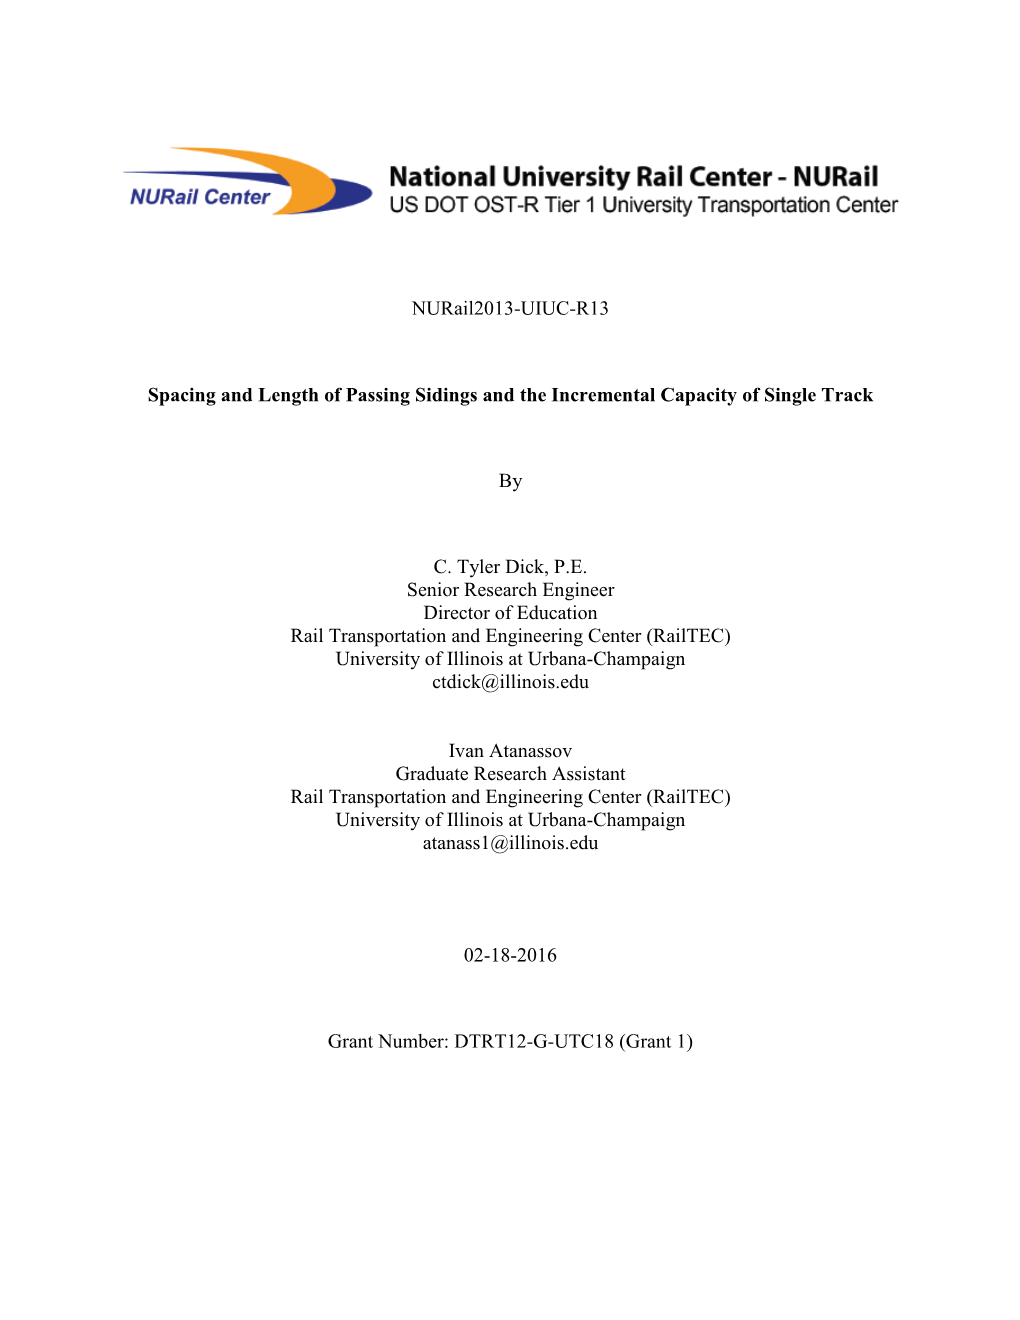 Nurail2013-UIUC-R13 Spacing and Length of Passing Sidings and The